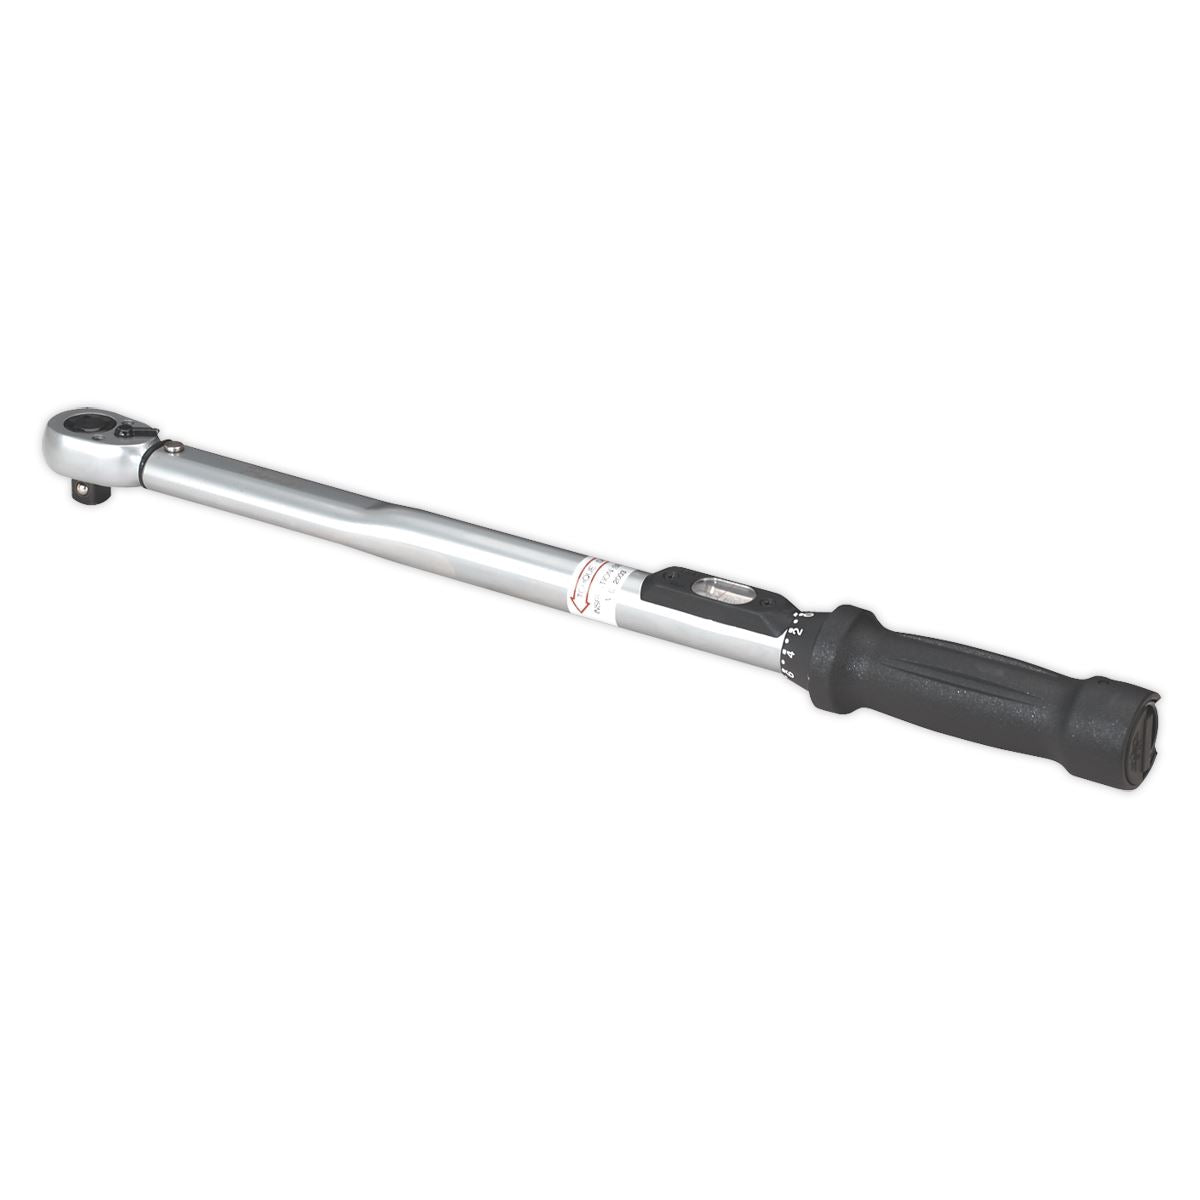 Sealey Premier Torque Wrench Locking Micrometer Style 1/2"Sq Drive 40-210Nm(30-150lb.ft) Calibrated